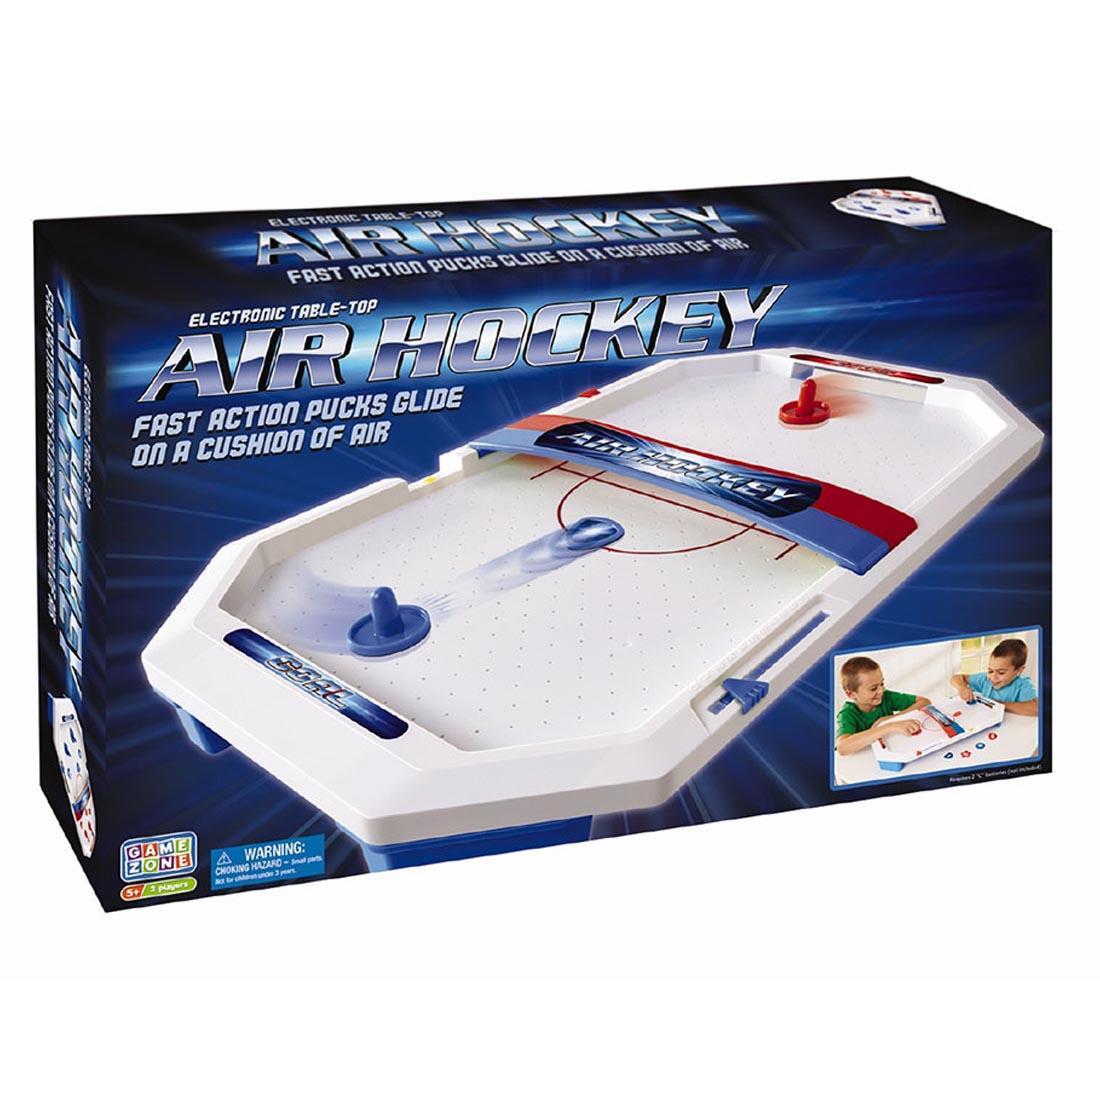 Electronic Table-Top Air Hockey Set package